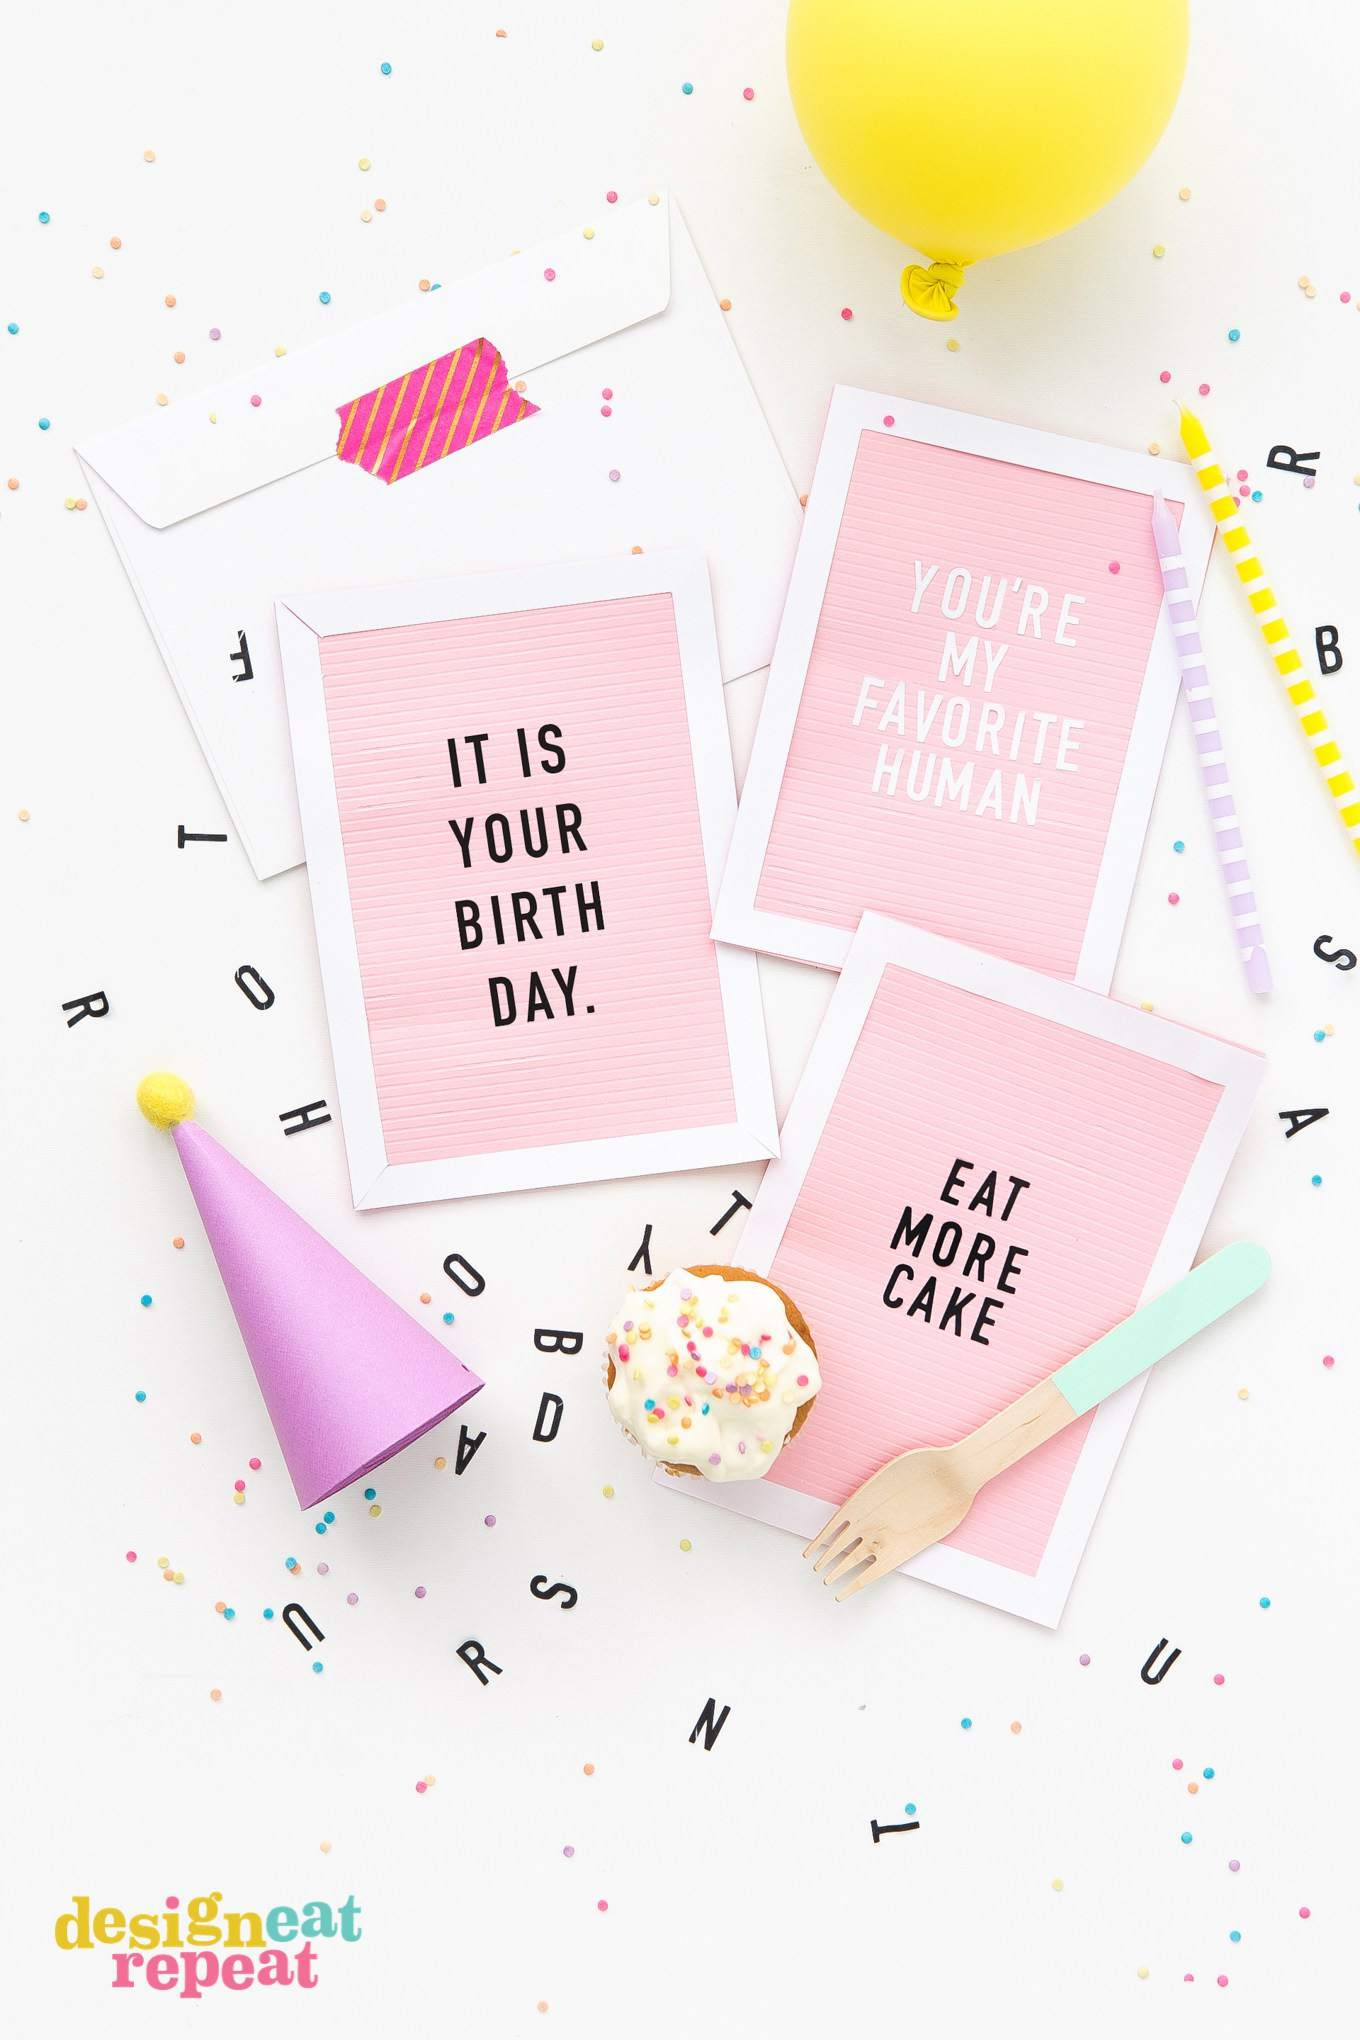 Get Inspiration From 25 Of The Best Diy Birthday Cards - Free Printable Birthday Cards For Your Best Friend